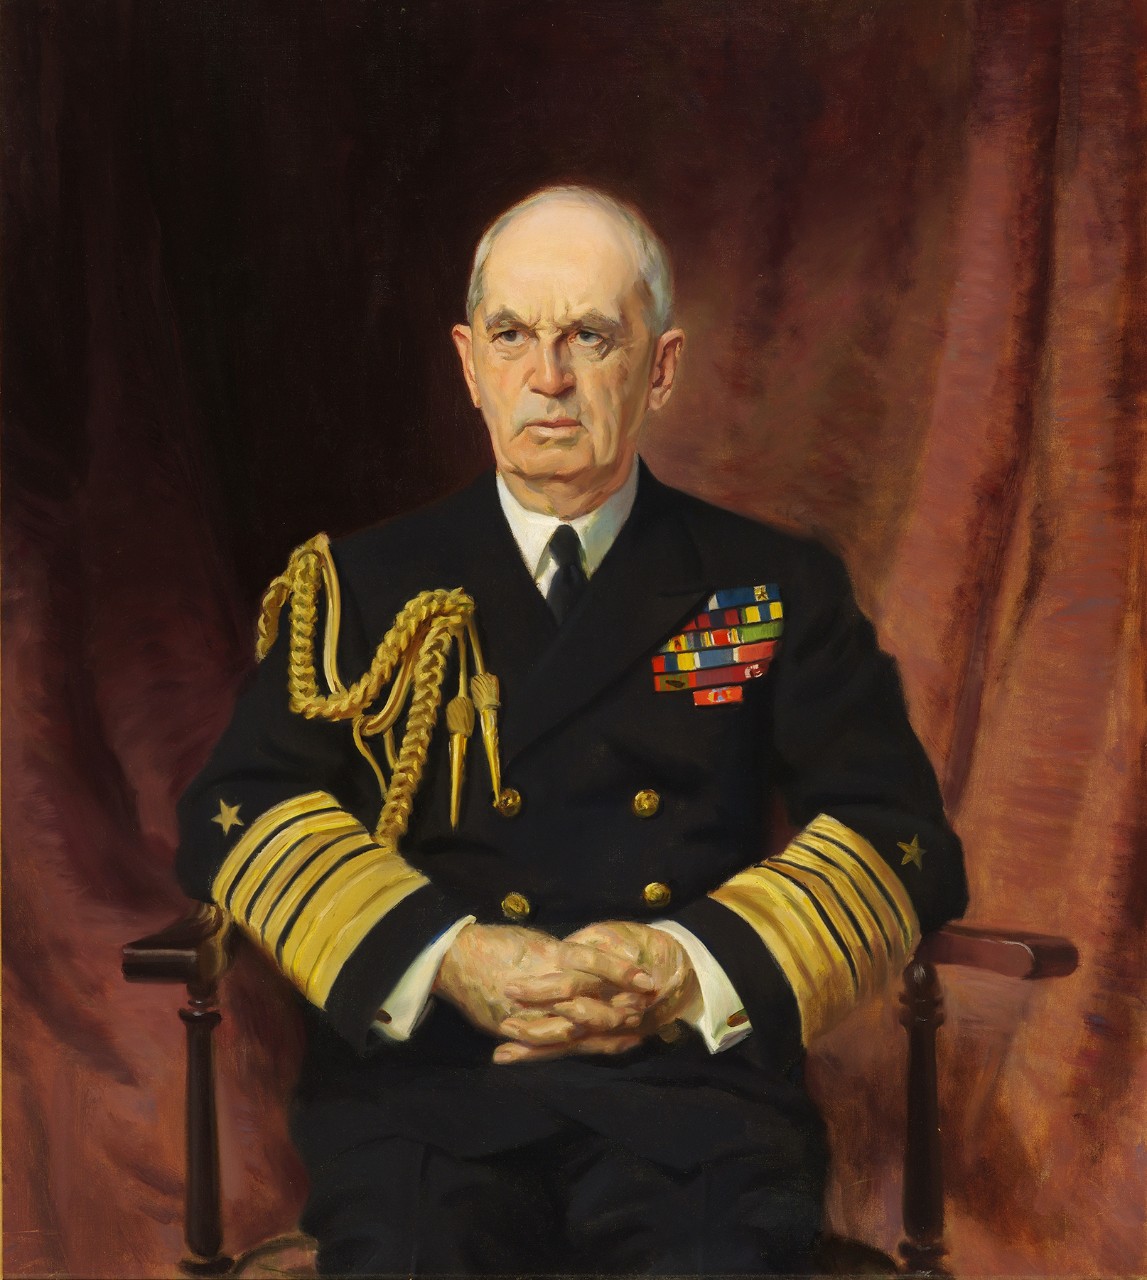 Admiral William Leahy is seated in a chair wearing dress blues